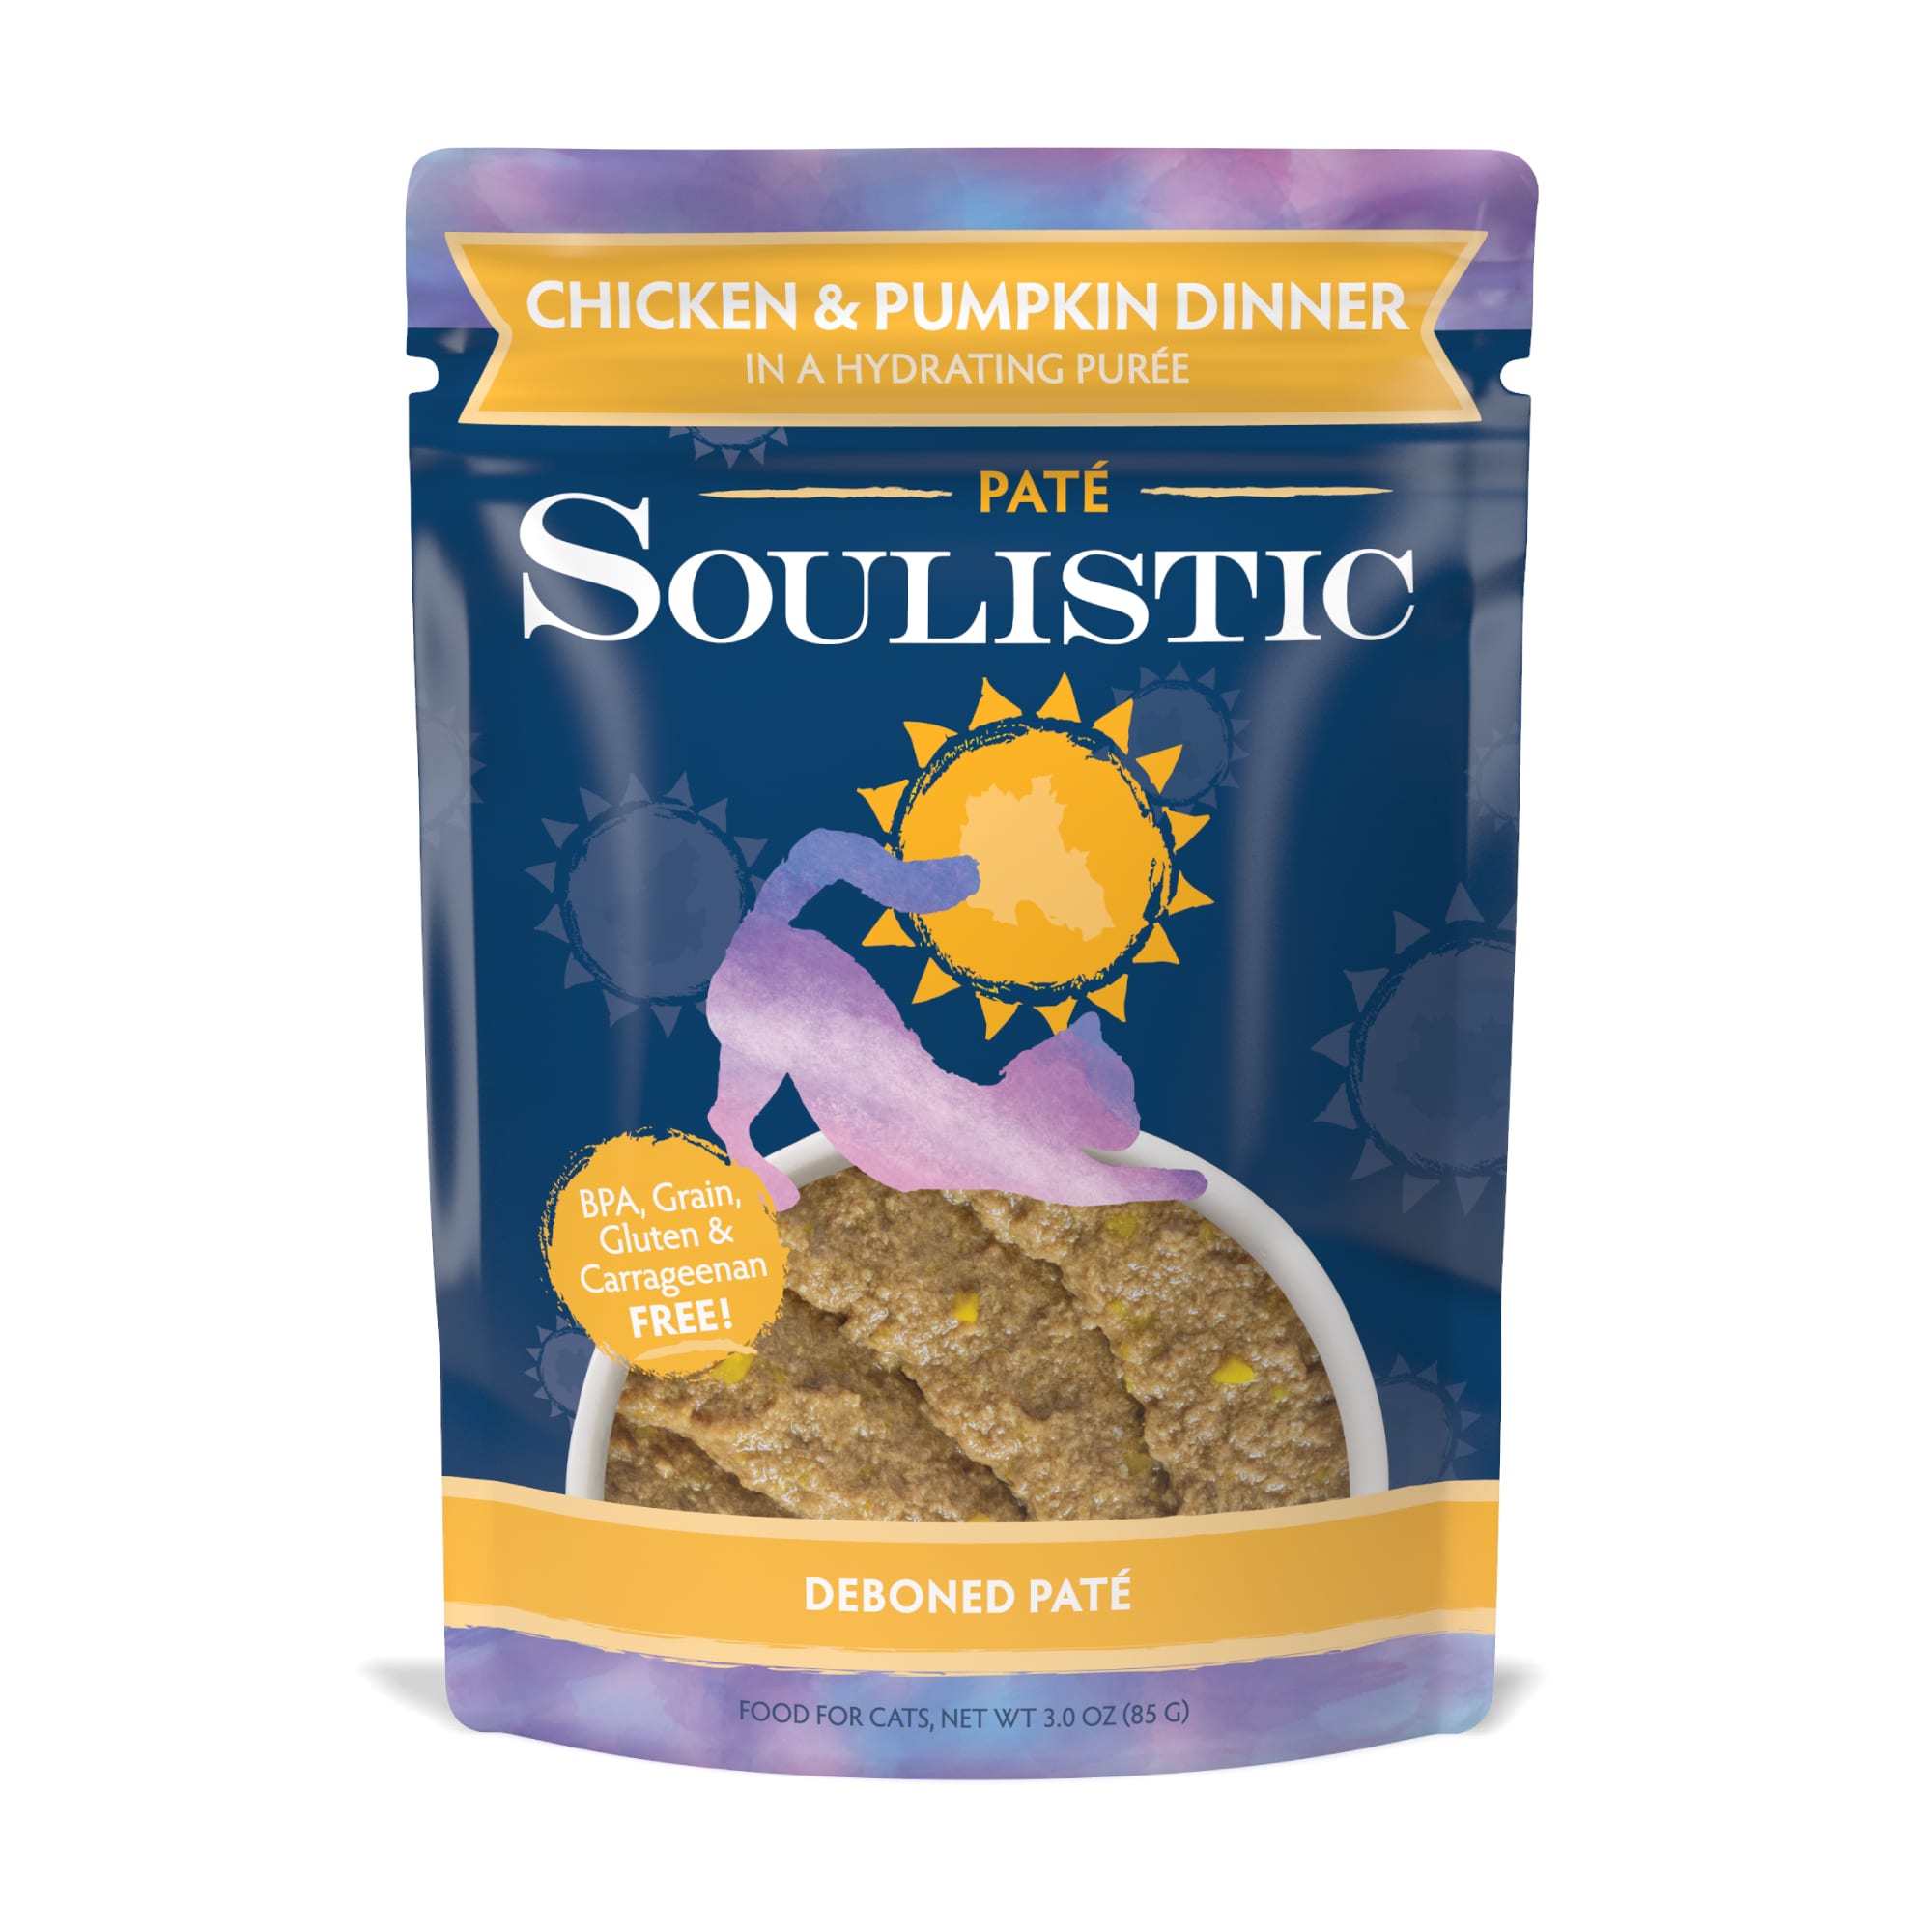 Soulistic Pate Chicken & Pumpkin Dinner in a Hydrating Puree Wet Cat